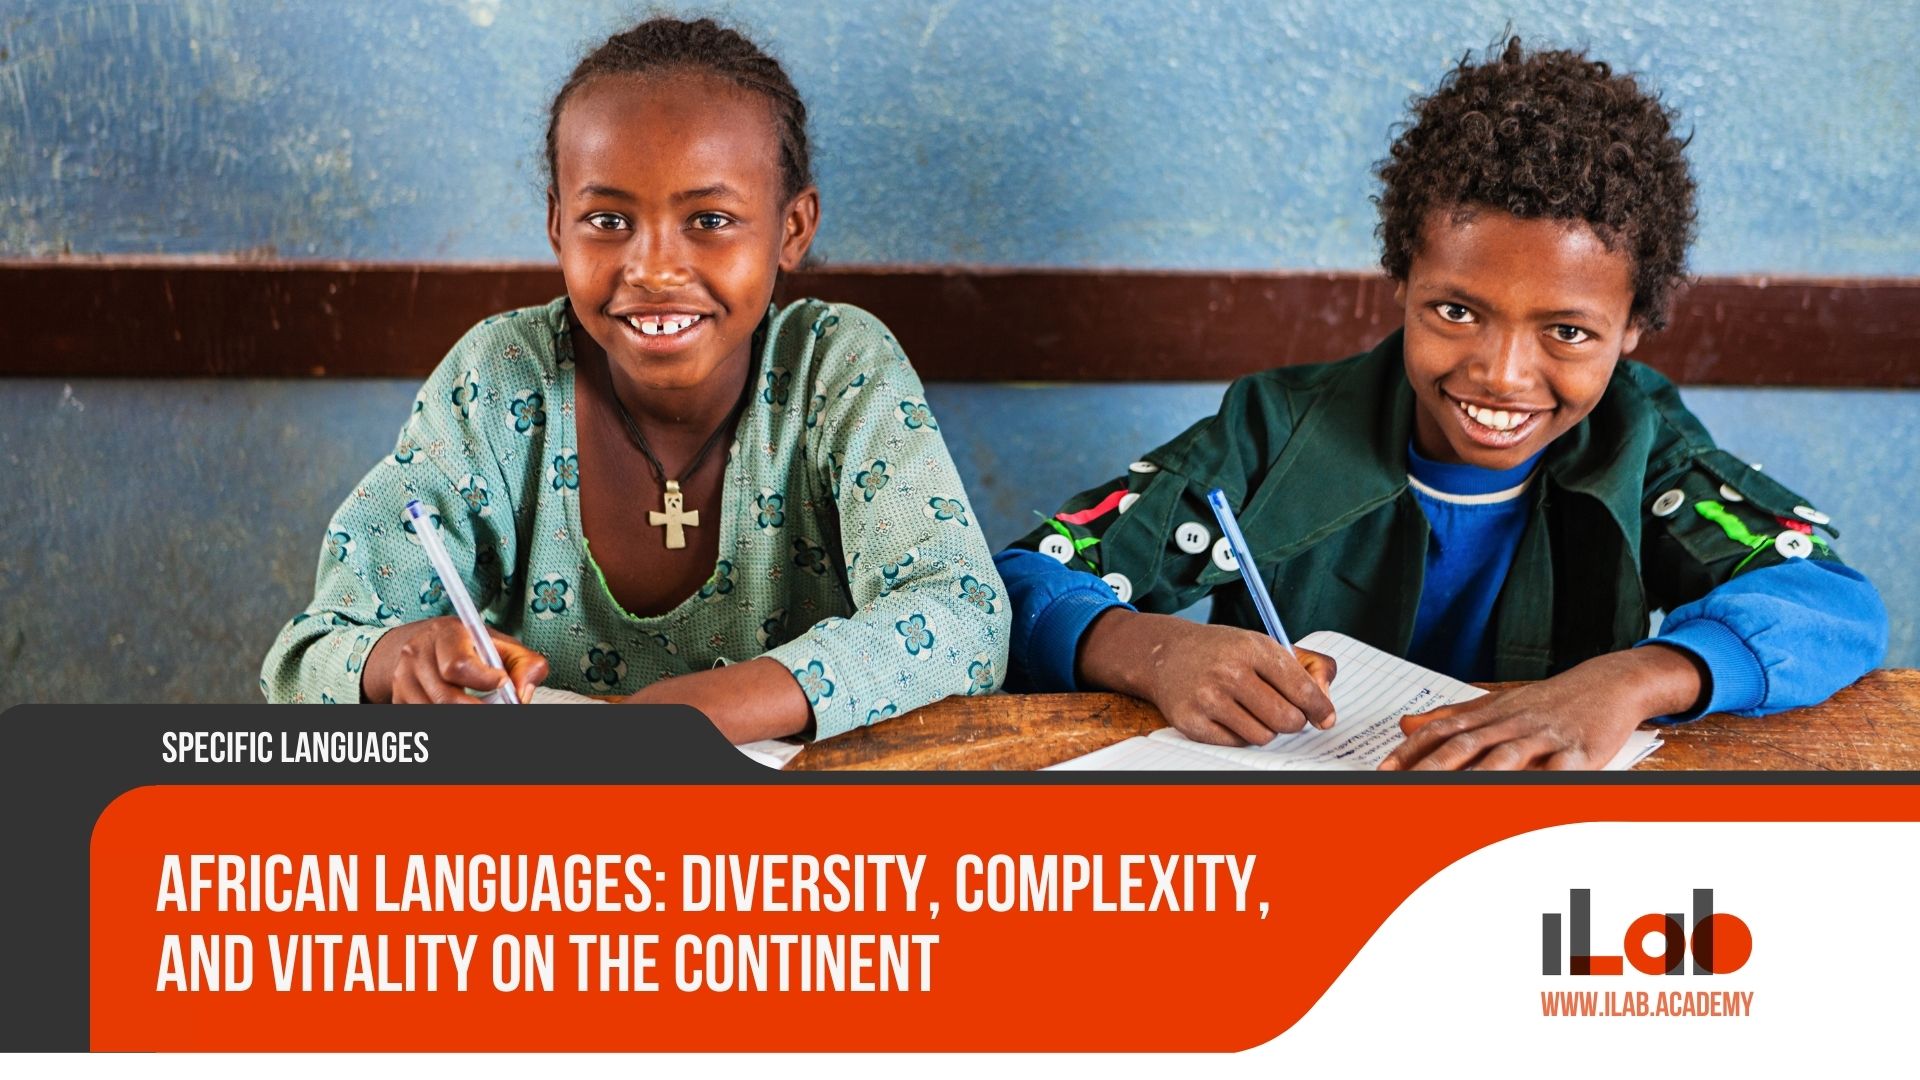 African Languages: Diversity, Complexity, and Vitality on the Continent